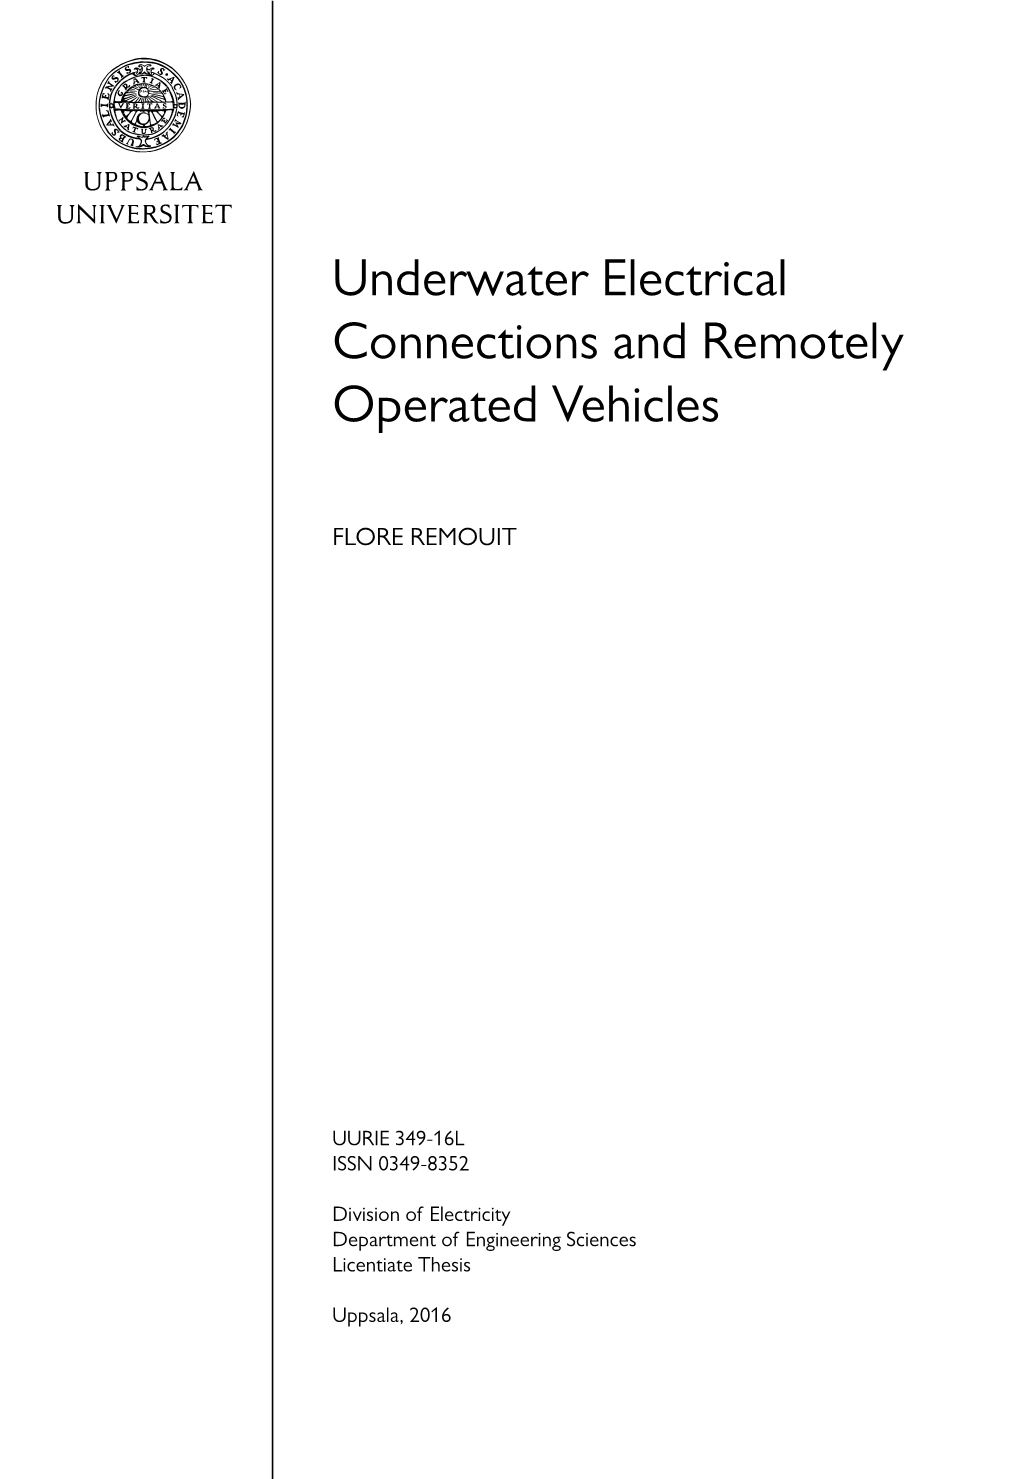 Underwater Electrical Connections and Remotely Operated Vehicles